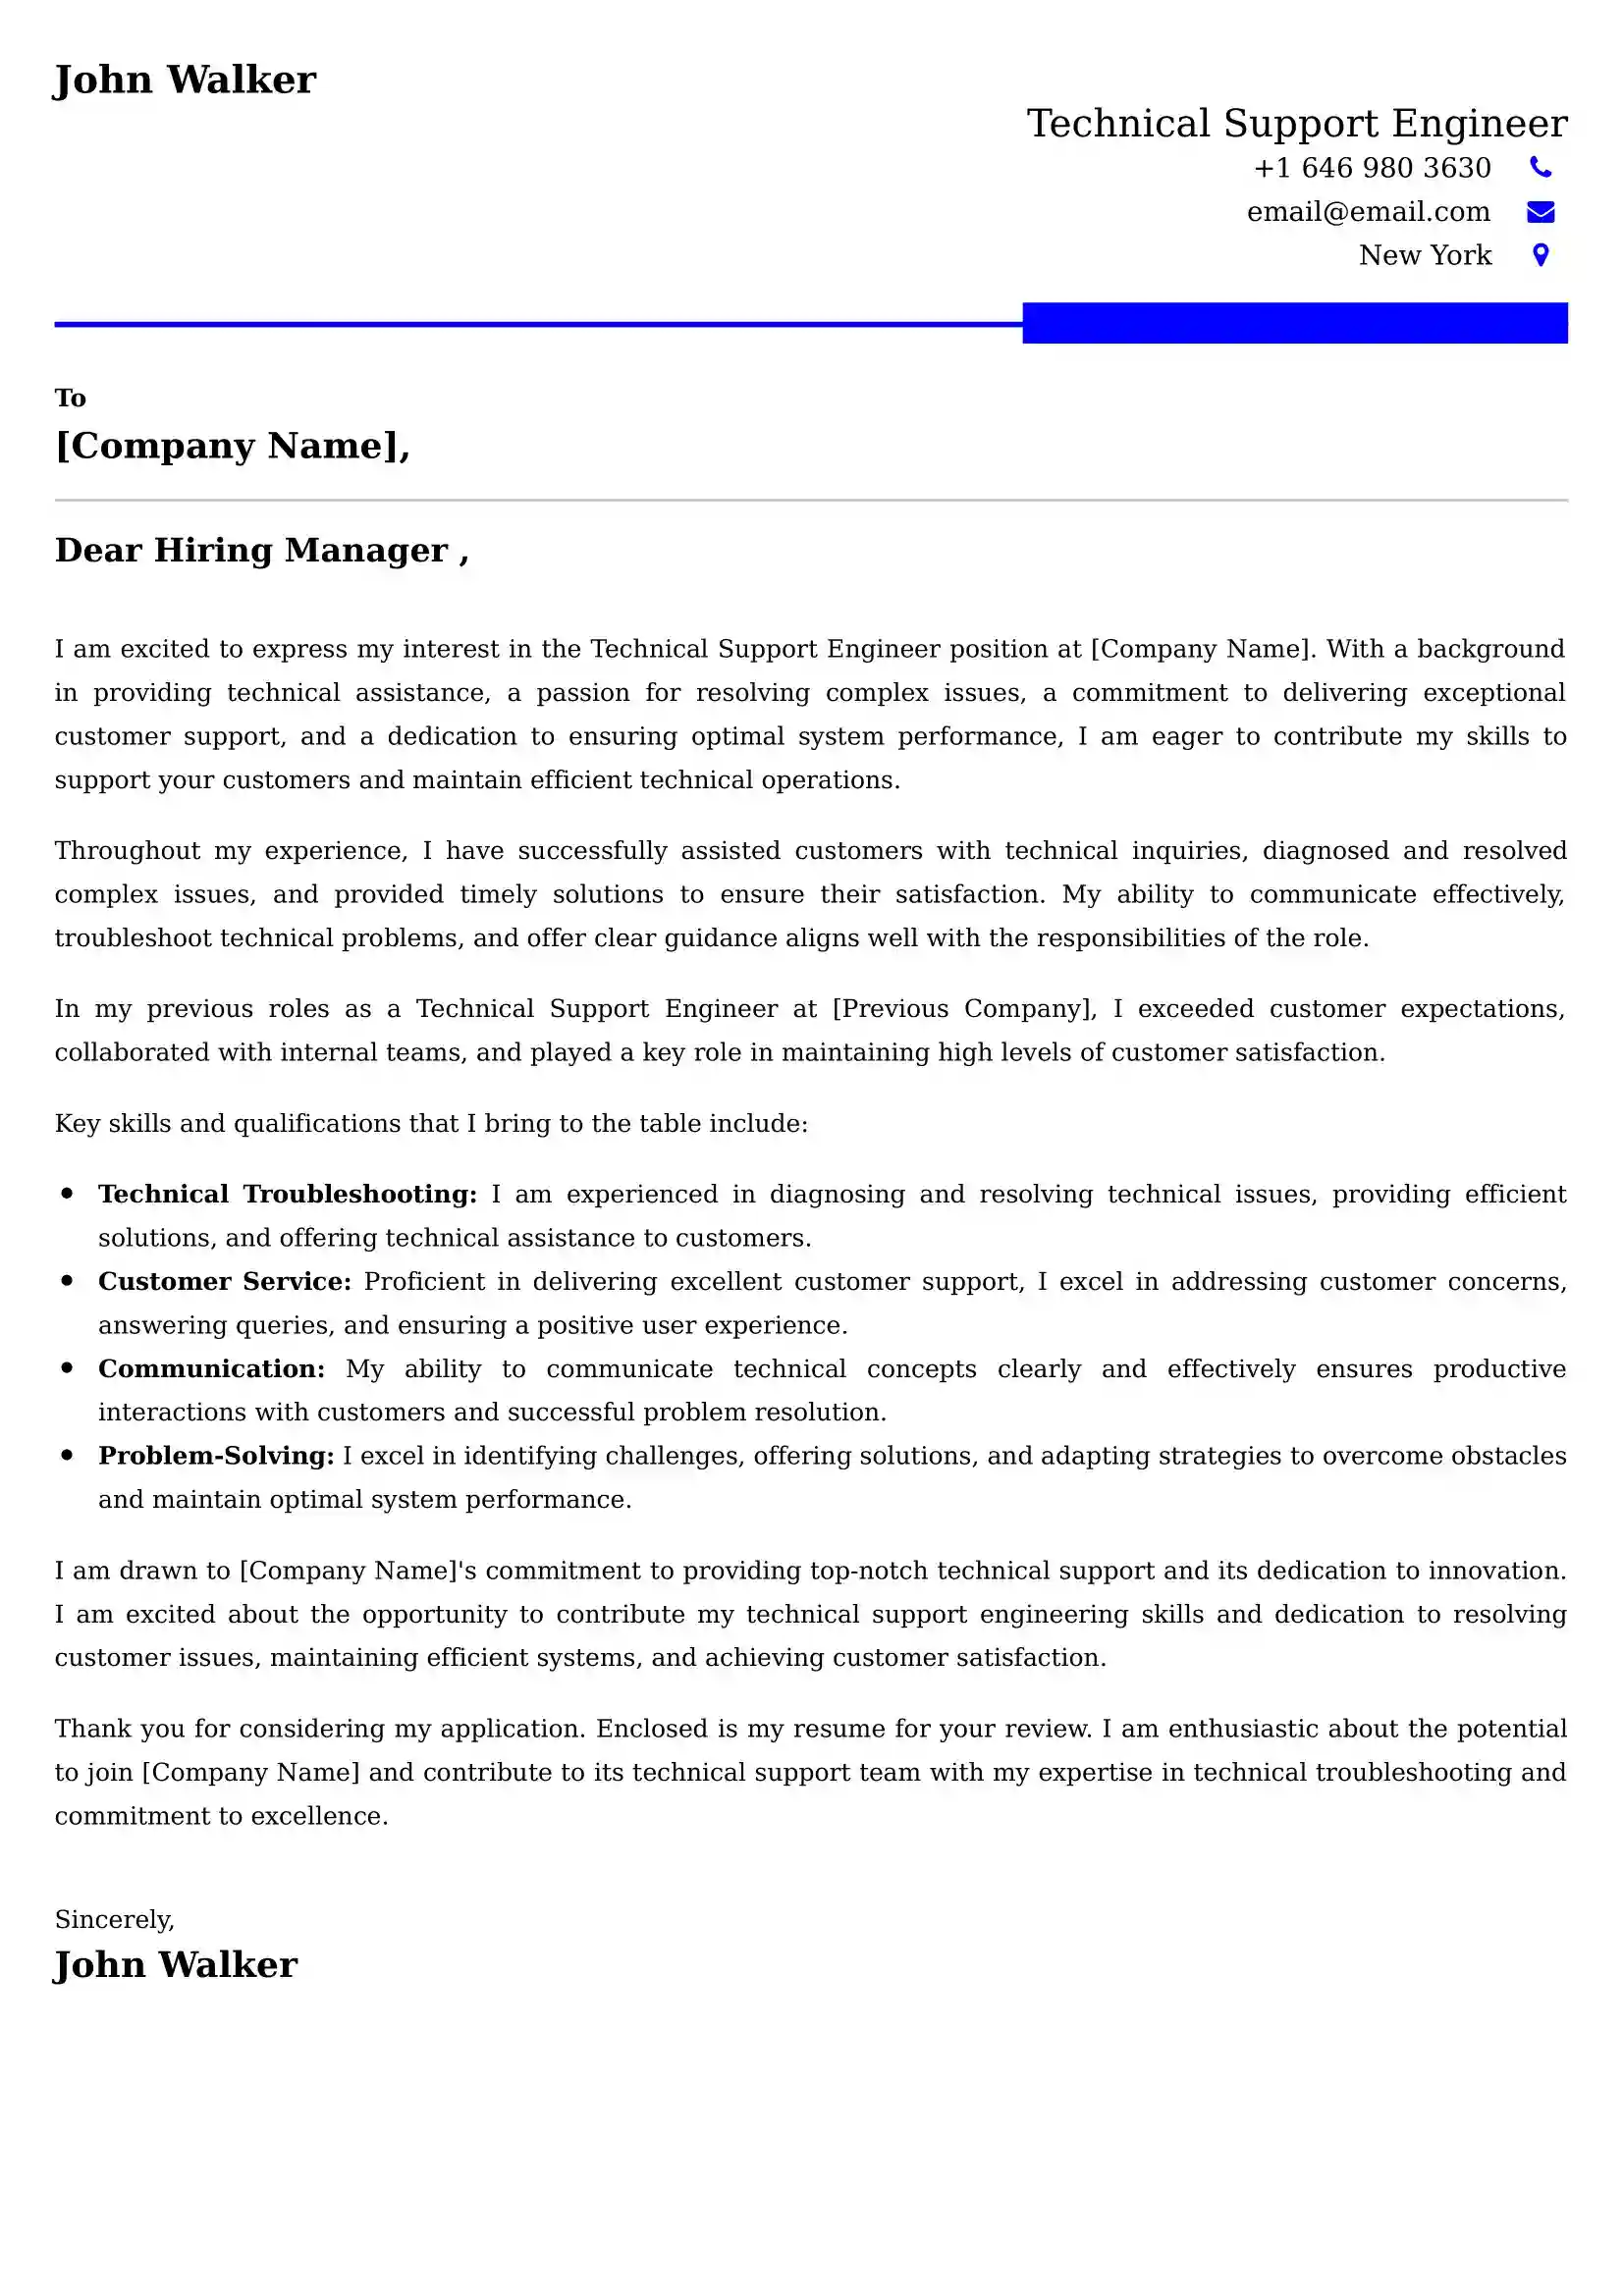 Technical Support Engineer Cover Letter Examples Australia